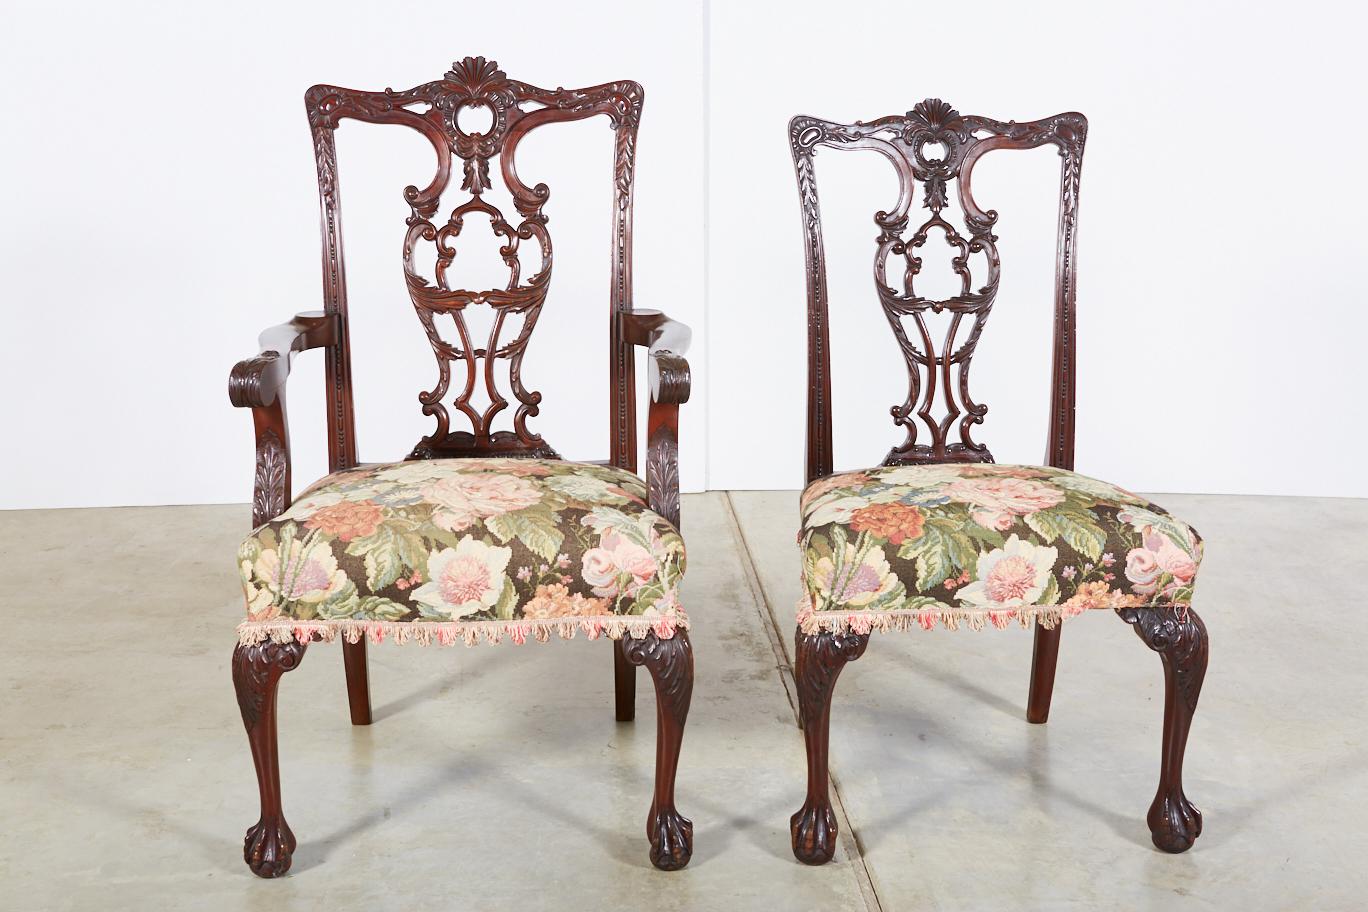 A set of 10 circa 1940 hand carved mahogany Chippendale style ribbon back dining chairs consisting of 2 armchairs and 8 side chairs. Beautiful dark patina. The armchairs' measurements are as follows: overall height 44